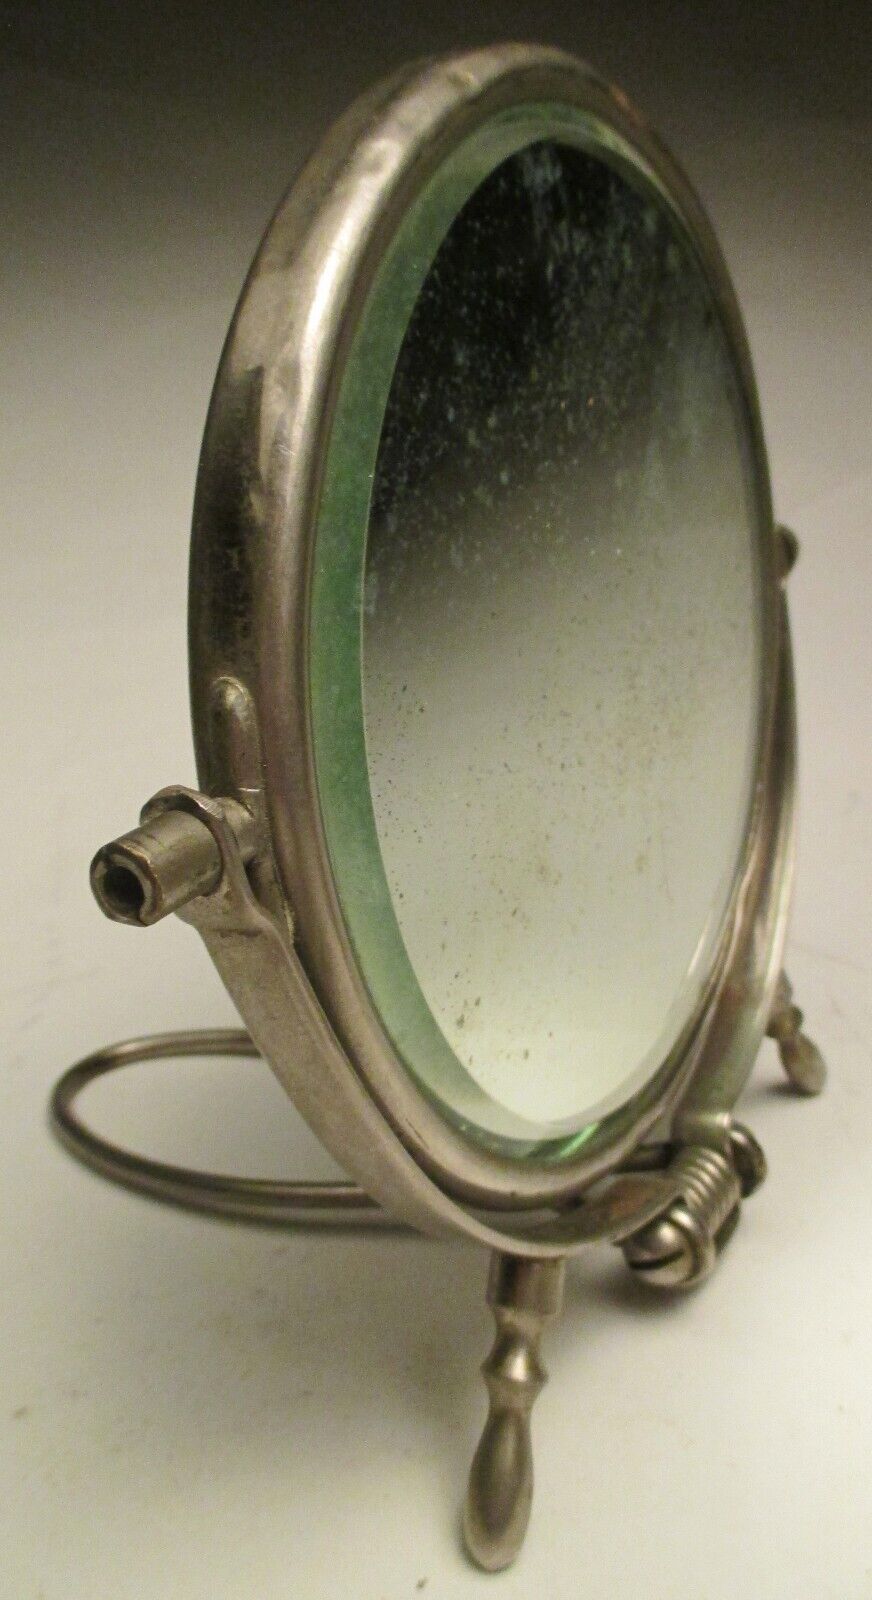 Vintage Man’s Shaving Beveled Mirror Footed For Counter Or Wall Mount 1920's